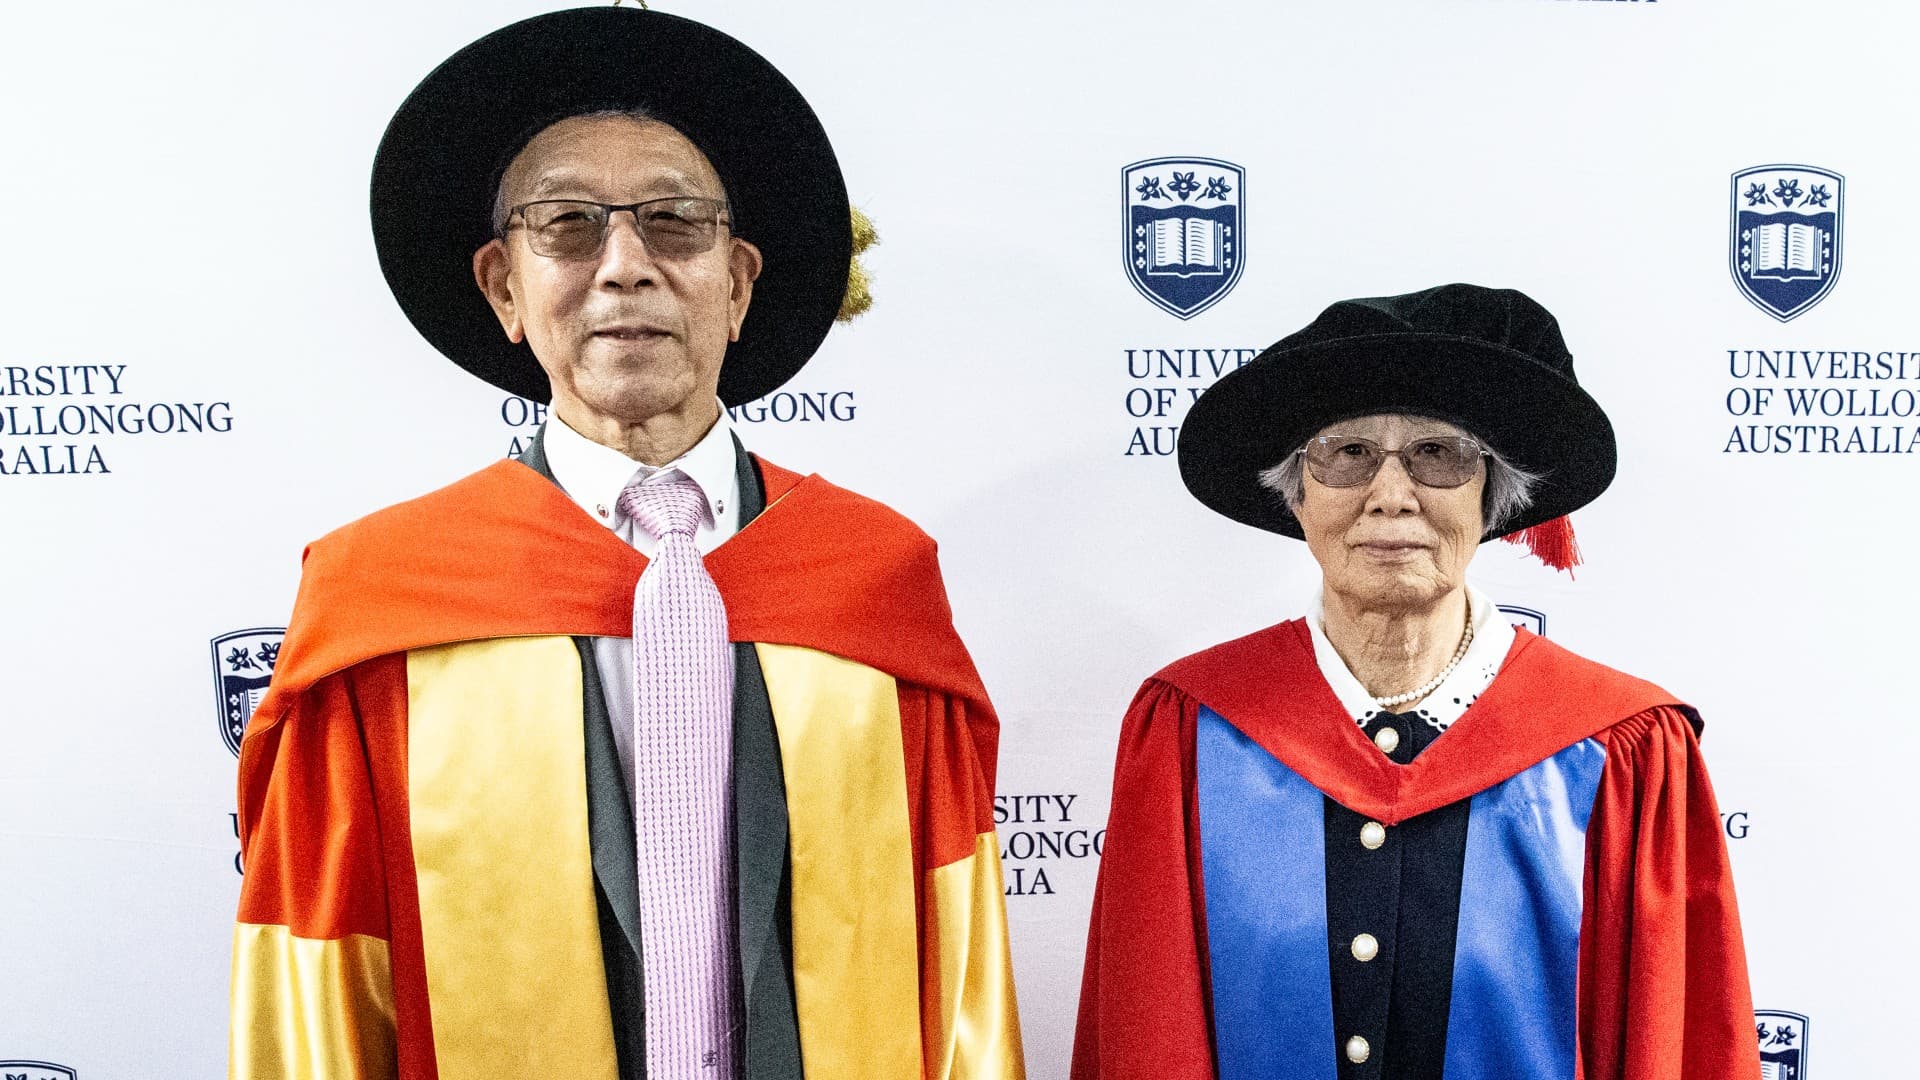 Professor Shi Xue Dou and Professor Hua Kin Liu are pictured in their graduation gowns and caps, against a UOW wall. Photo: Paul Jones